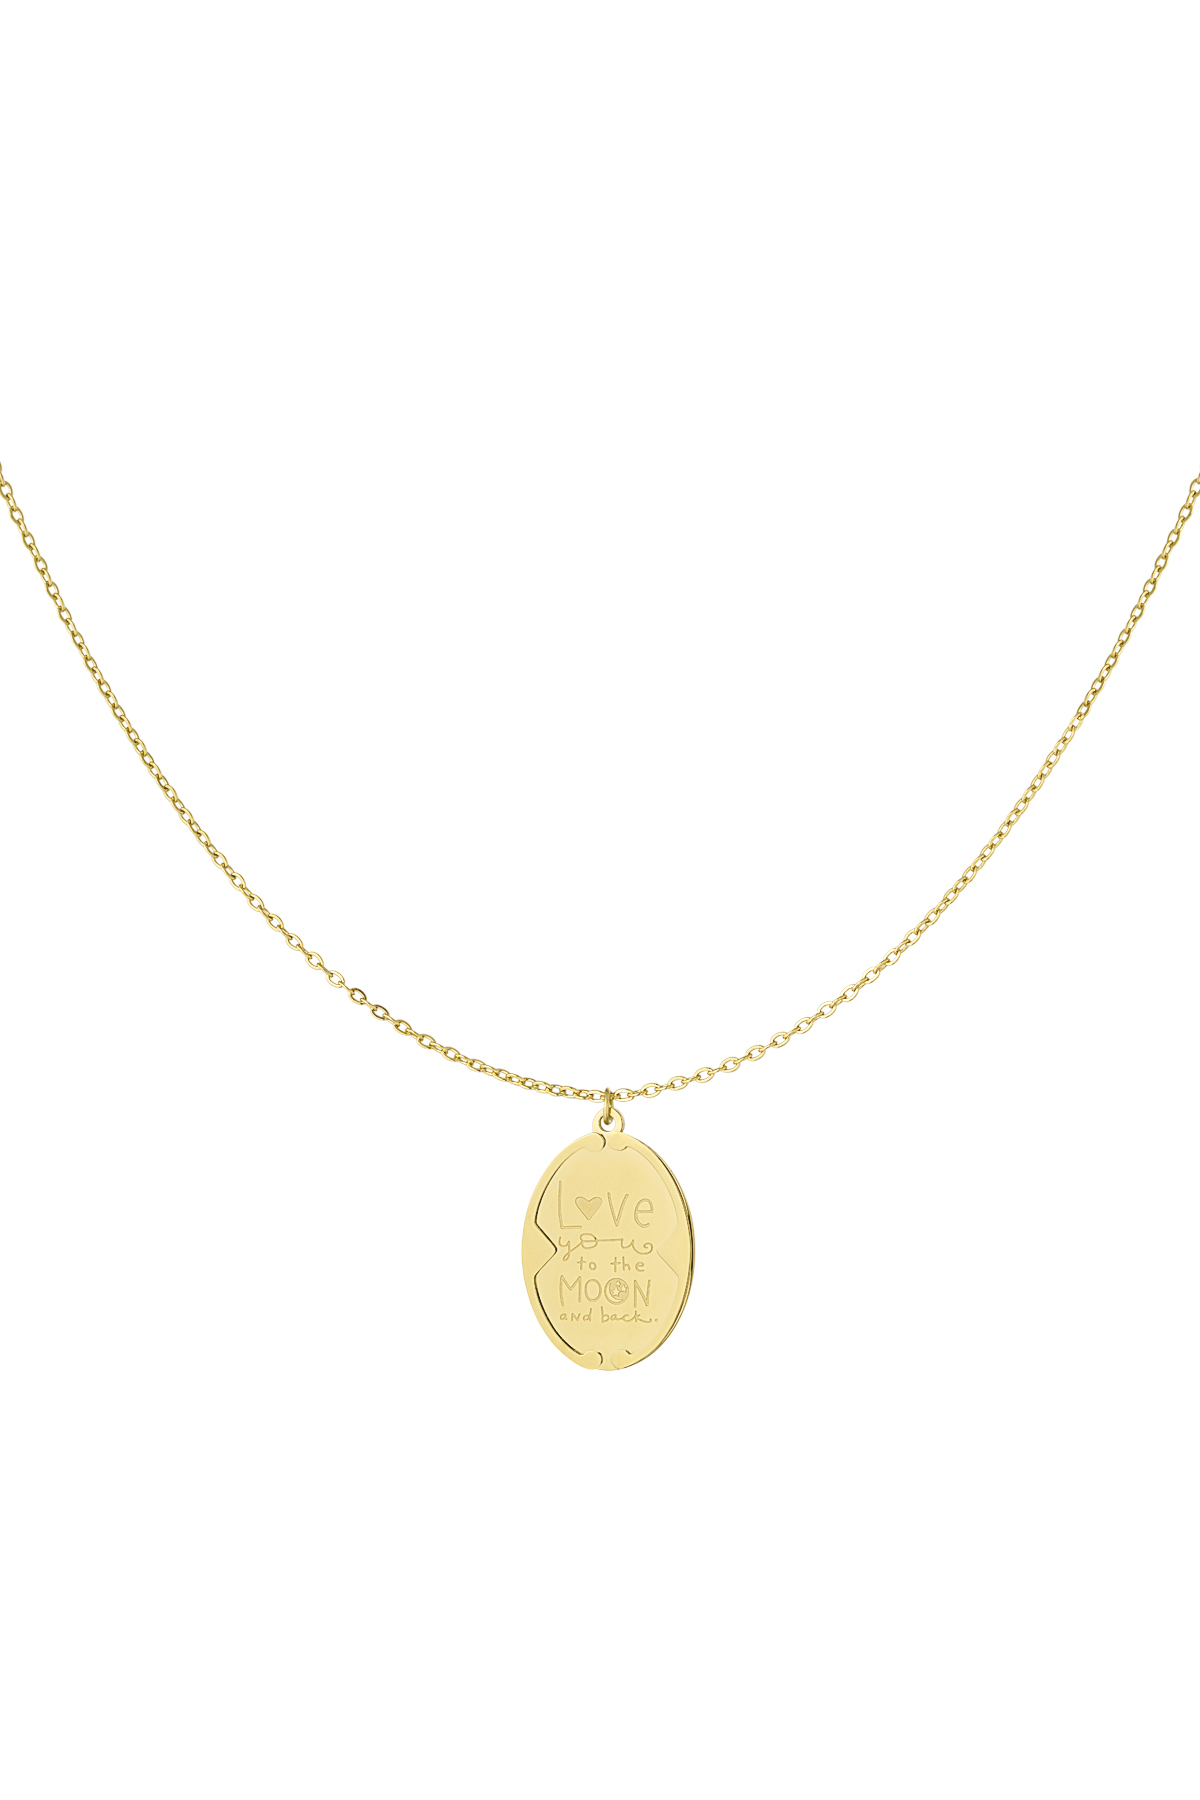 Love you to the moon and back necklace - gold  h5 